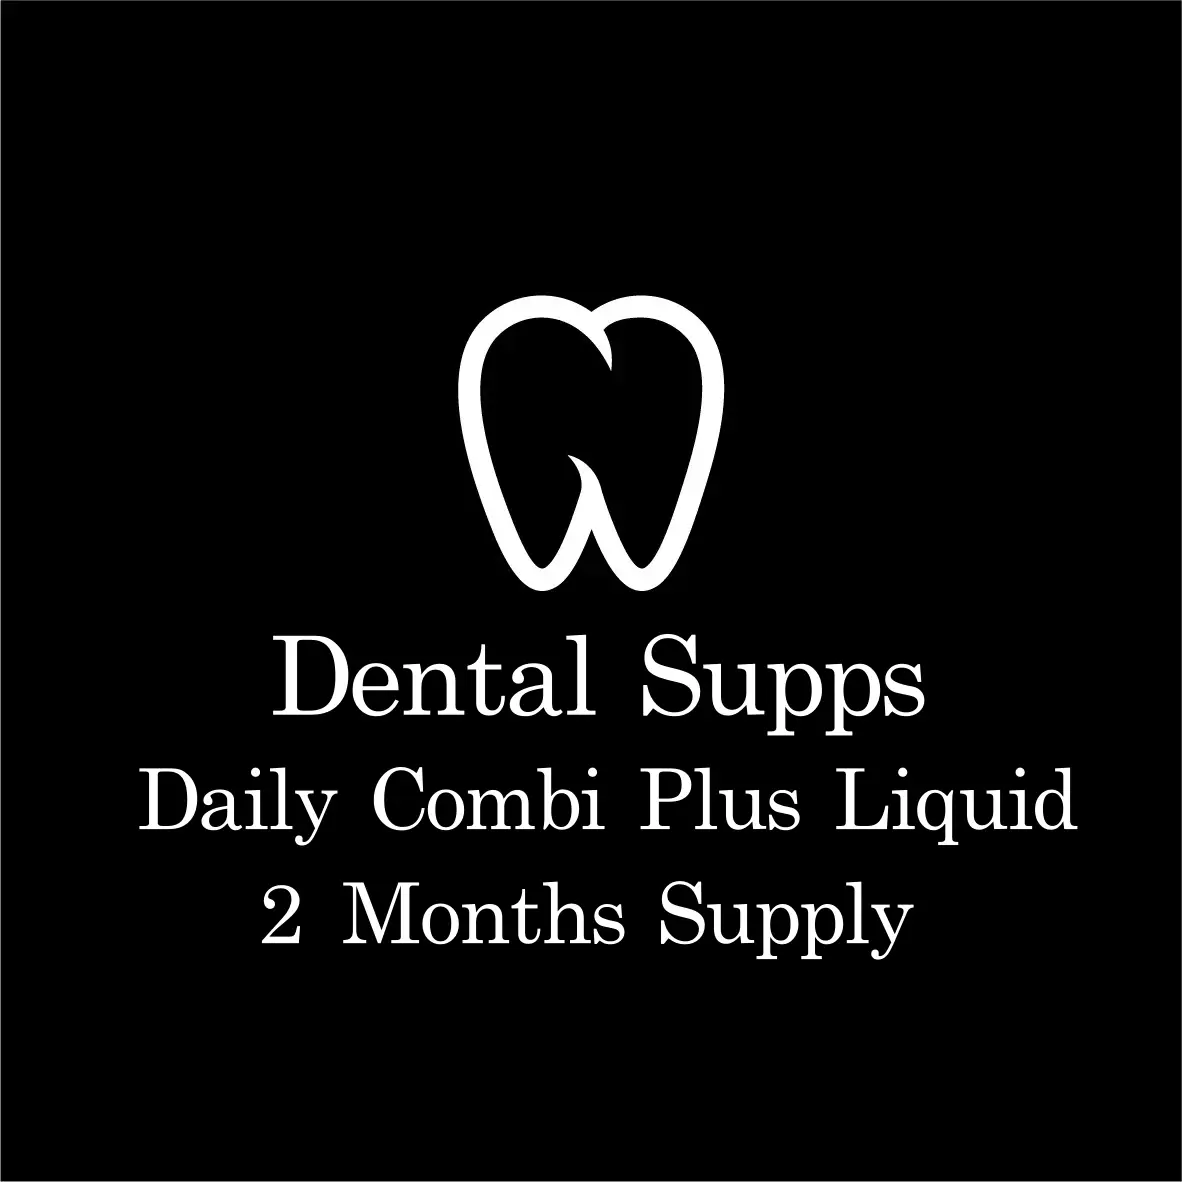 Dental Supps Daily Combi Plus, 2 Months Supply